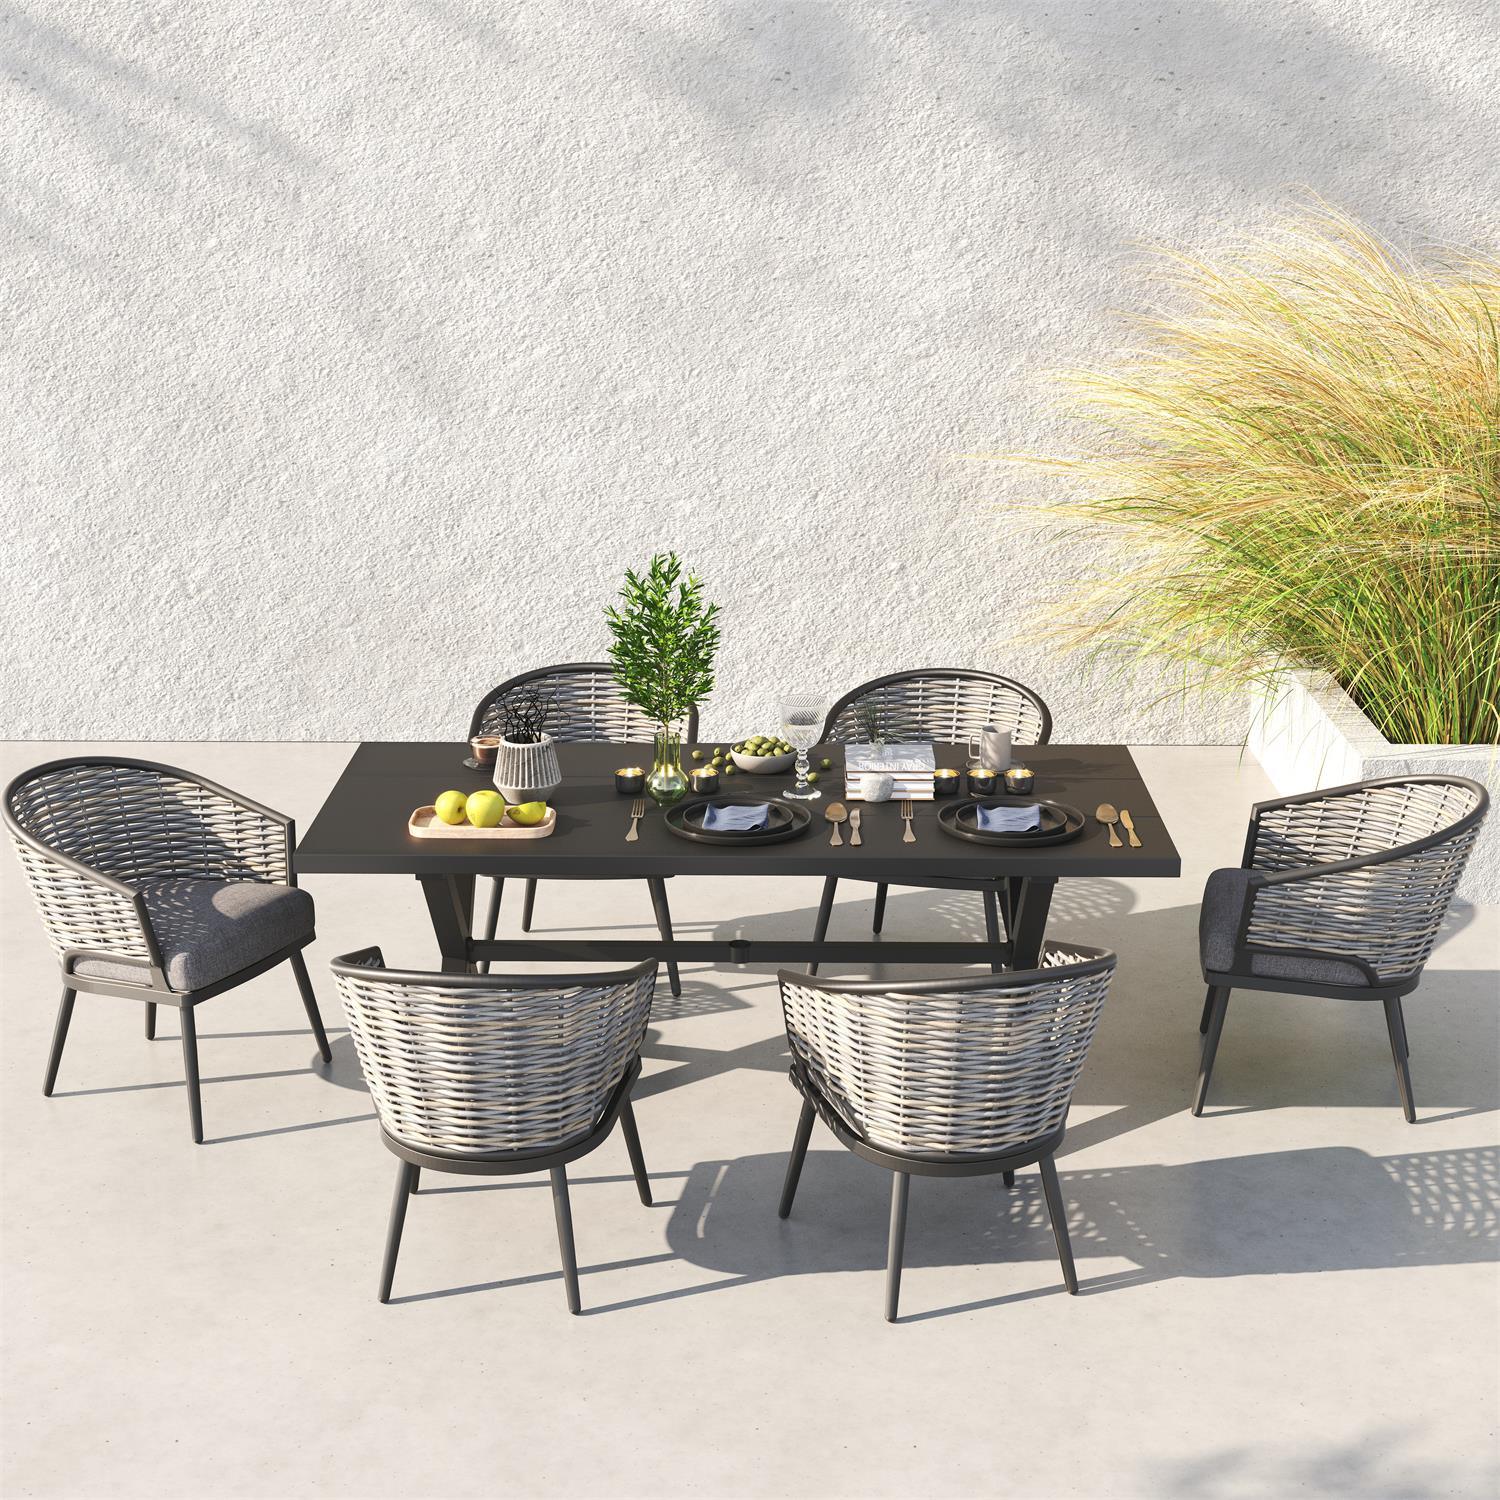 Burano Grey 6-person Outdoor Dining Set with aluminum frame, 6 dining chairs with grey cushions, 1 aluminum X-Shaped rectangle dining Table, put in backyard - Jardina Furniture #Pieces_7-pc.